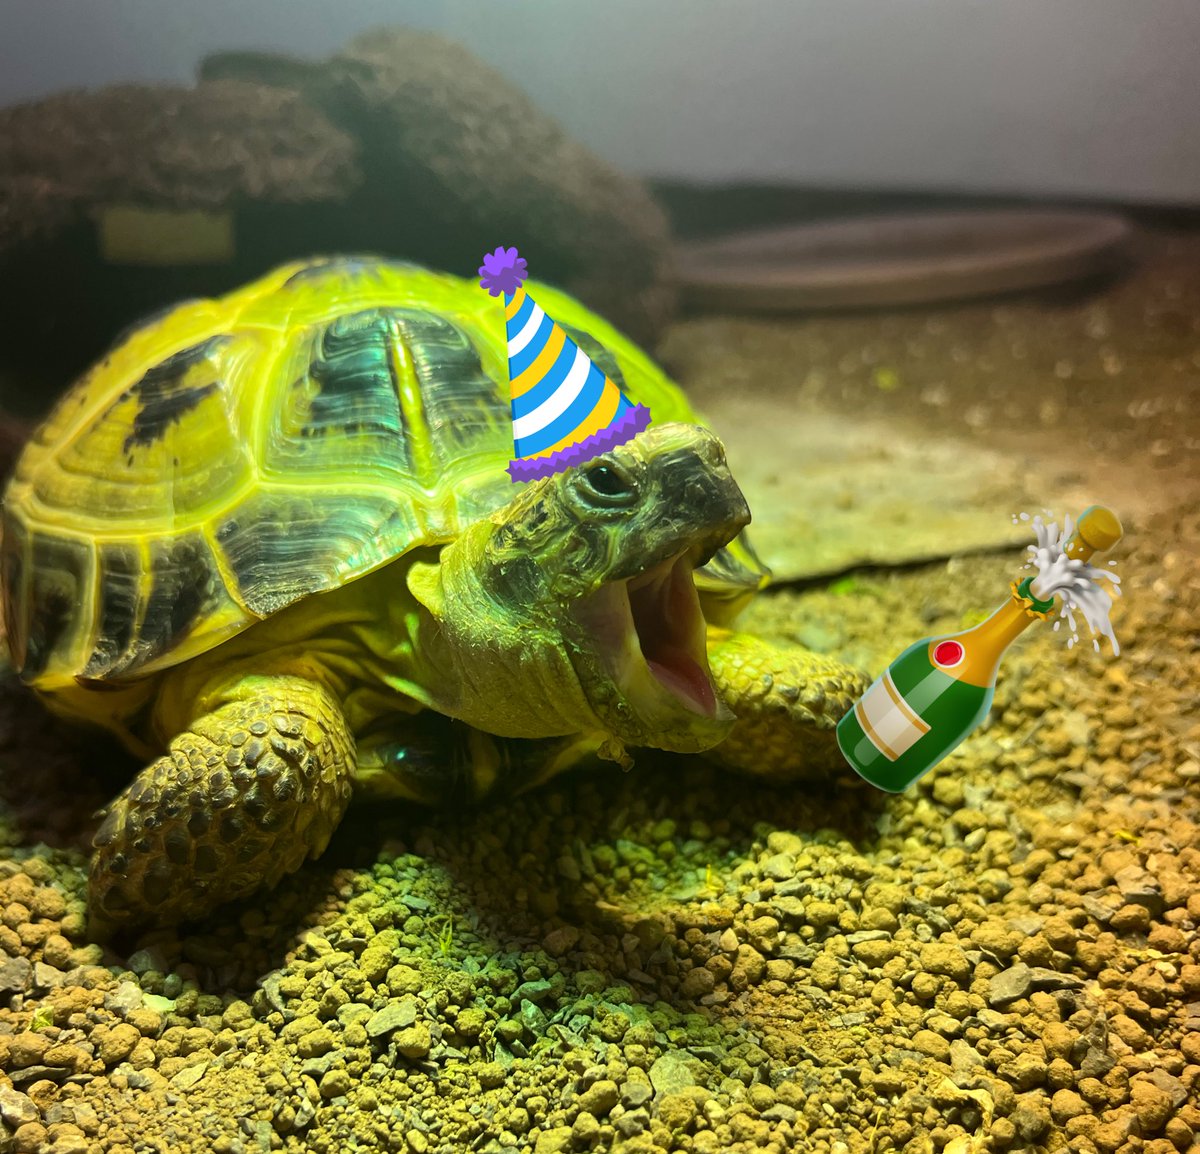 I’m busy getting in the party spirit - Happy New Year everyone 💚🐢😃🎉 #HappyNewYear2023 #PartyTort